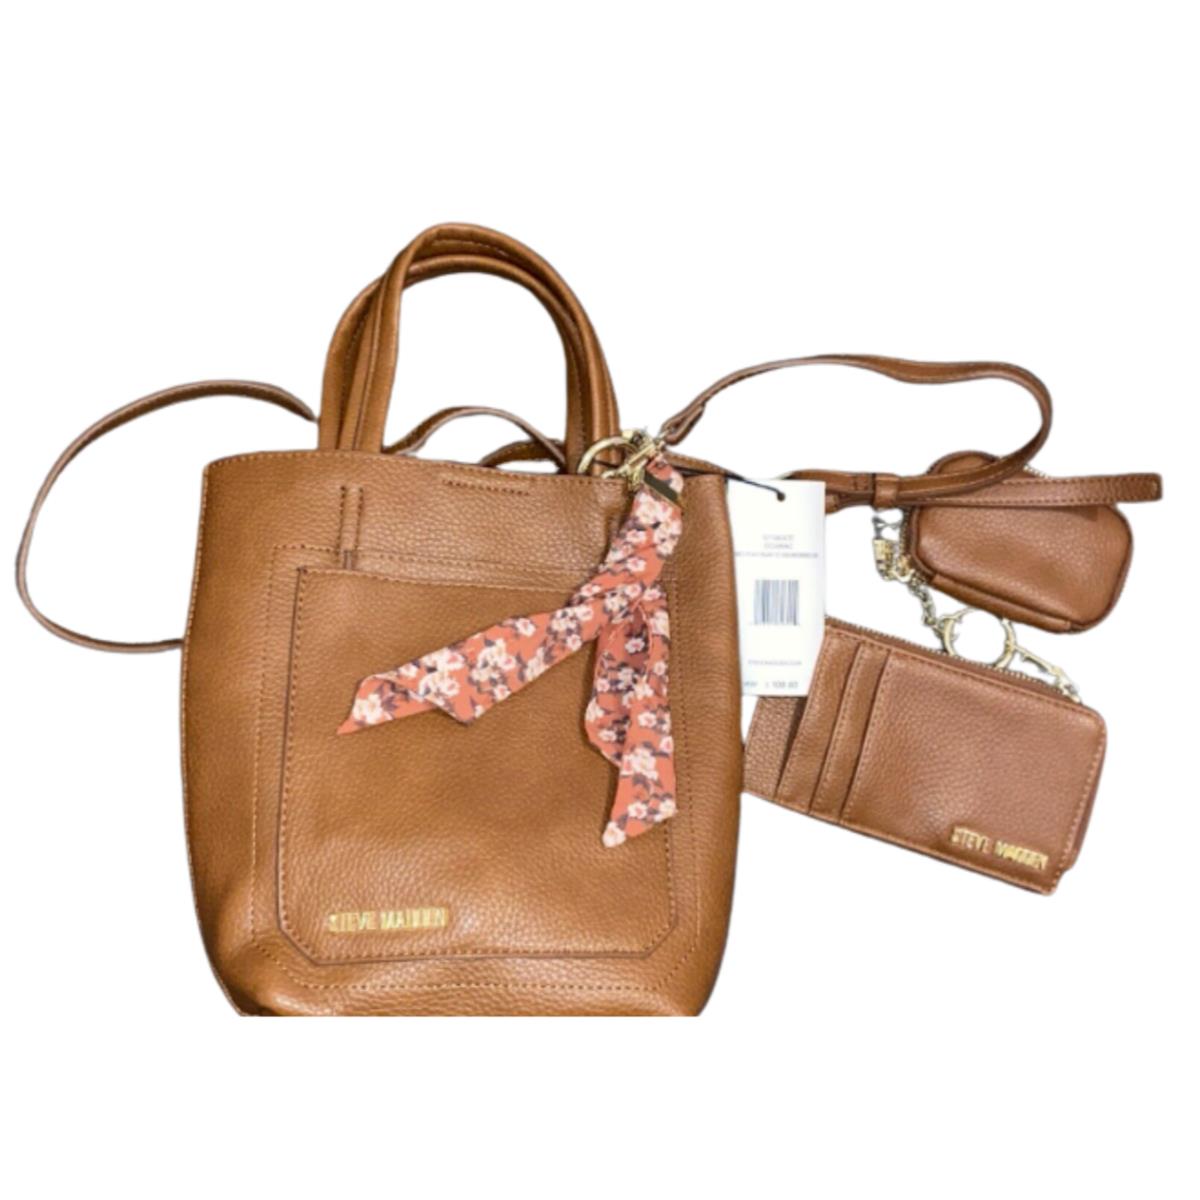 Steve Madden Mini Tote Bag Scarf Credit Card Earbud Cases Pebble Leather - Exterior: , Lining: , Hardware: Gold